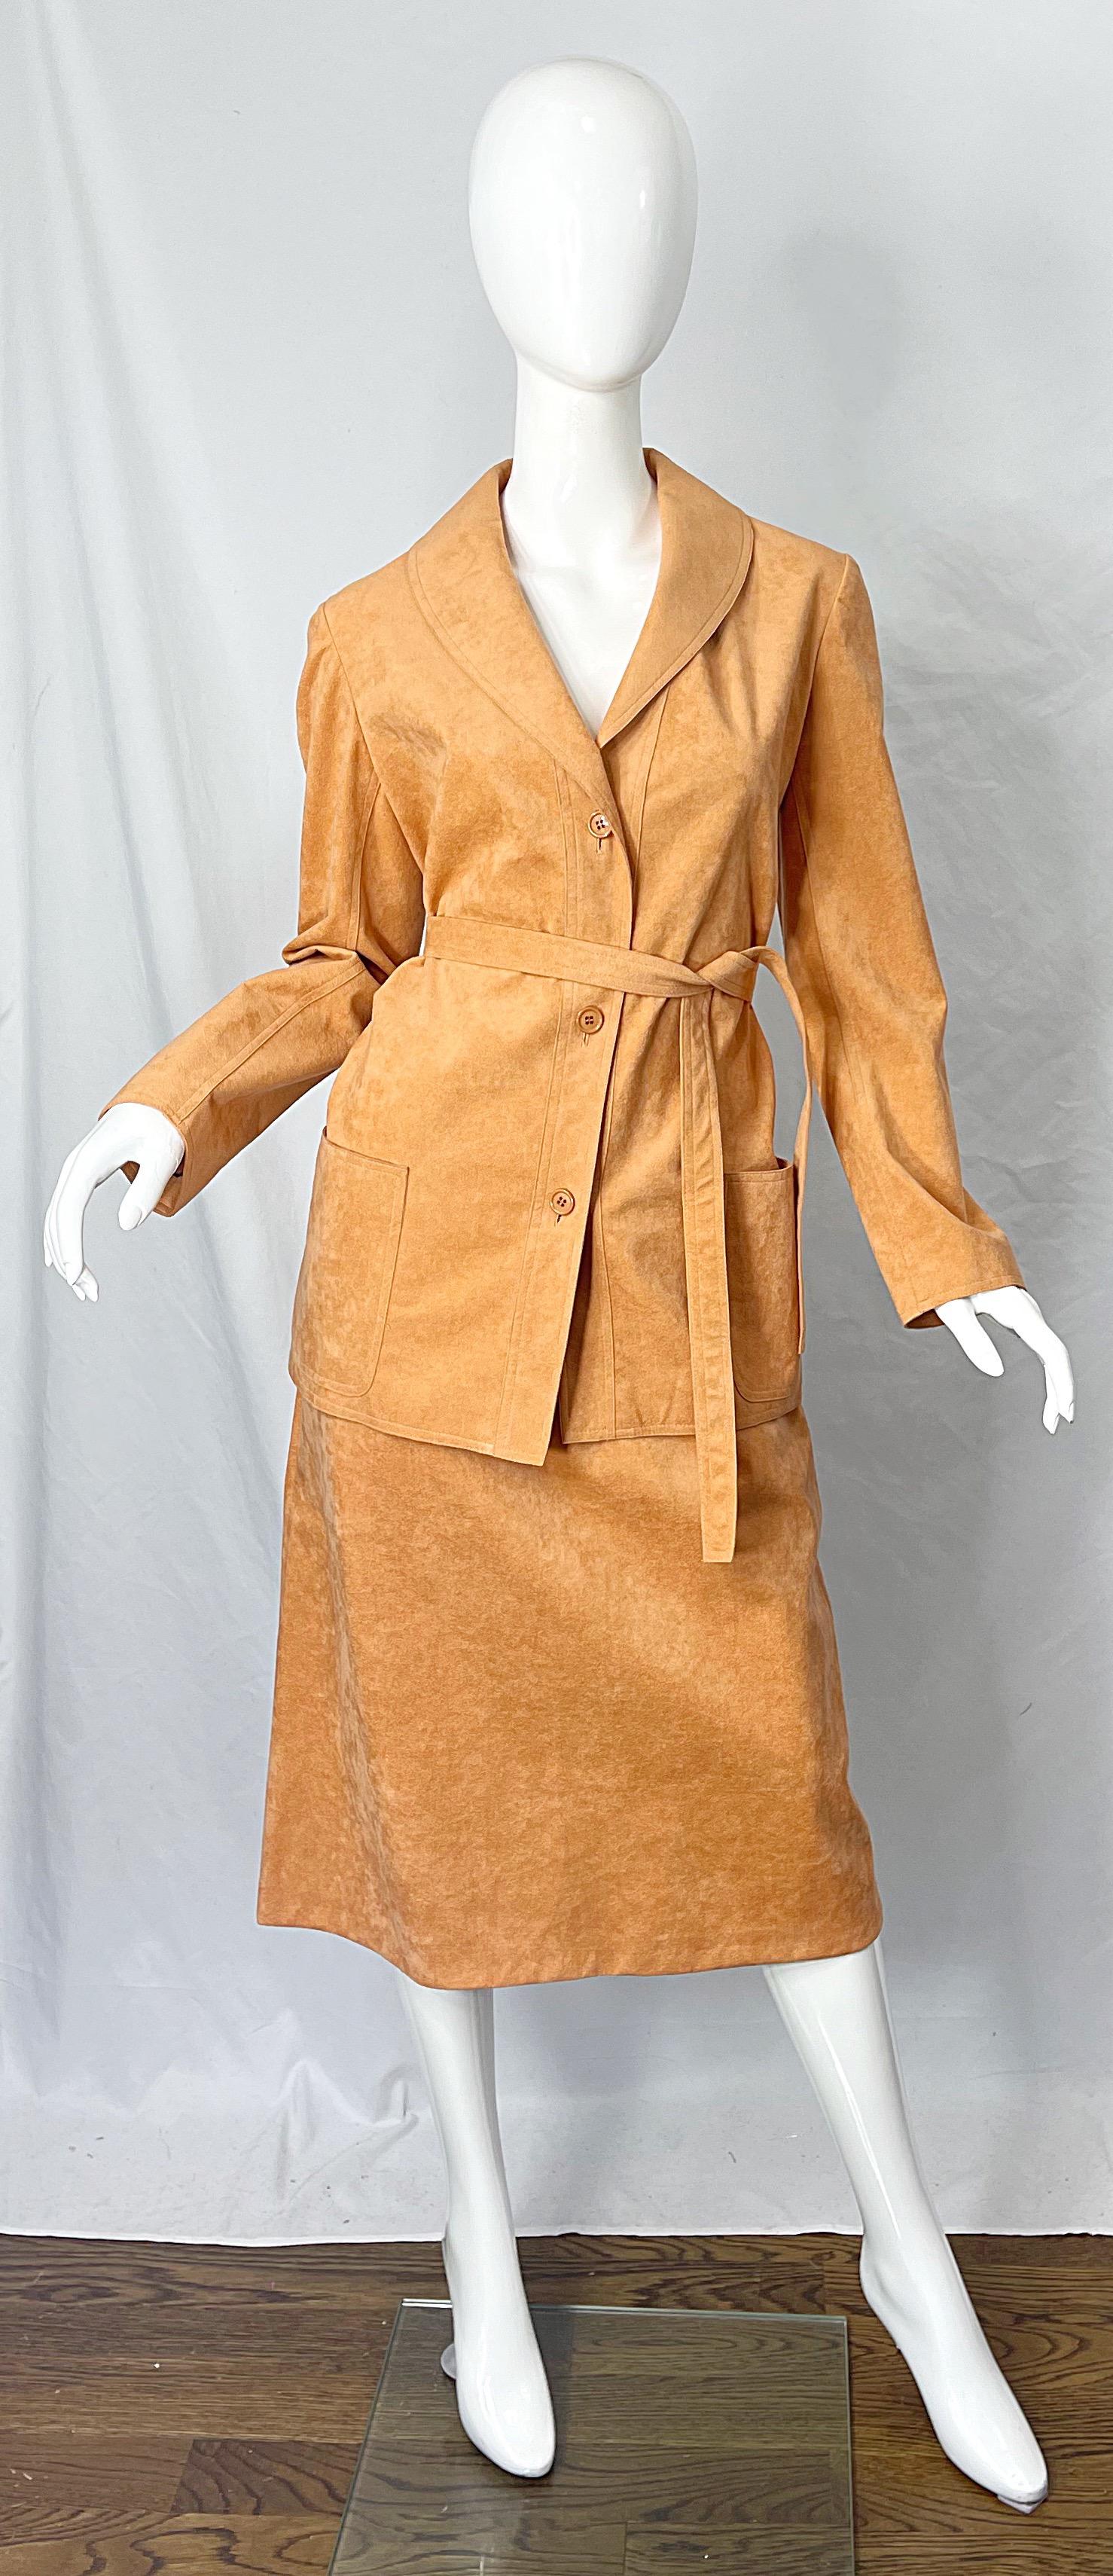 Halston 1970s Salmon Peach Ultrasuede Vintage 70s Belted Jacket and Skirt Suit For Sale 8